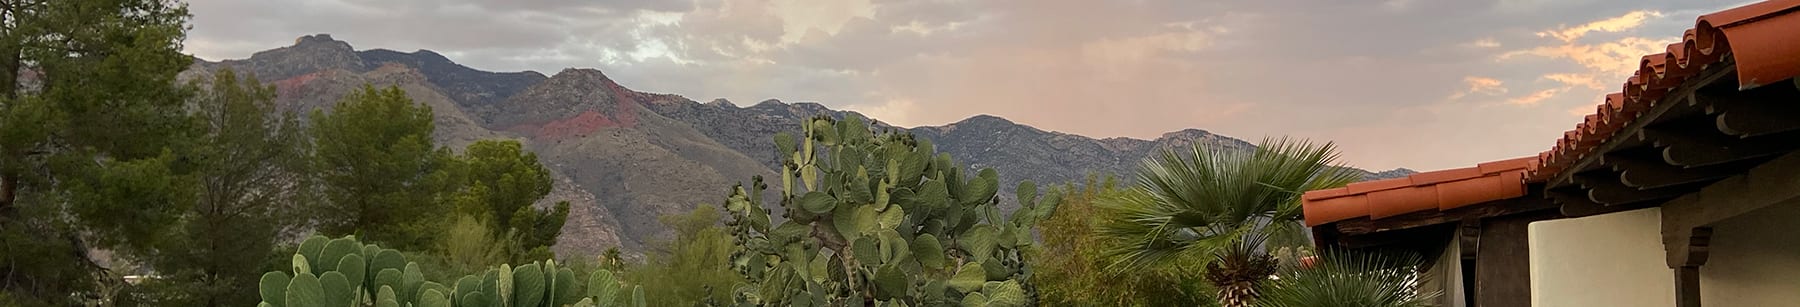 Tucson's Catalina mountains with rooftop and shrubs